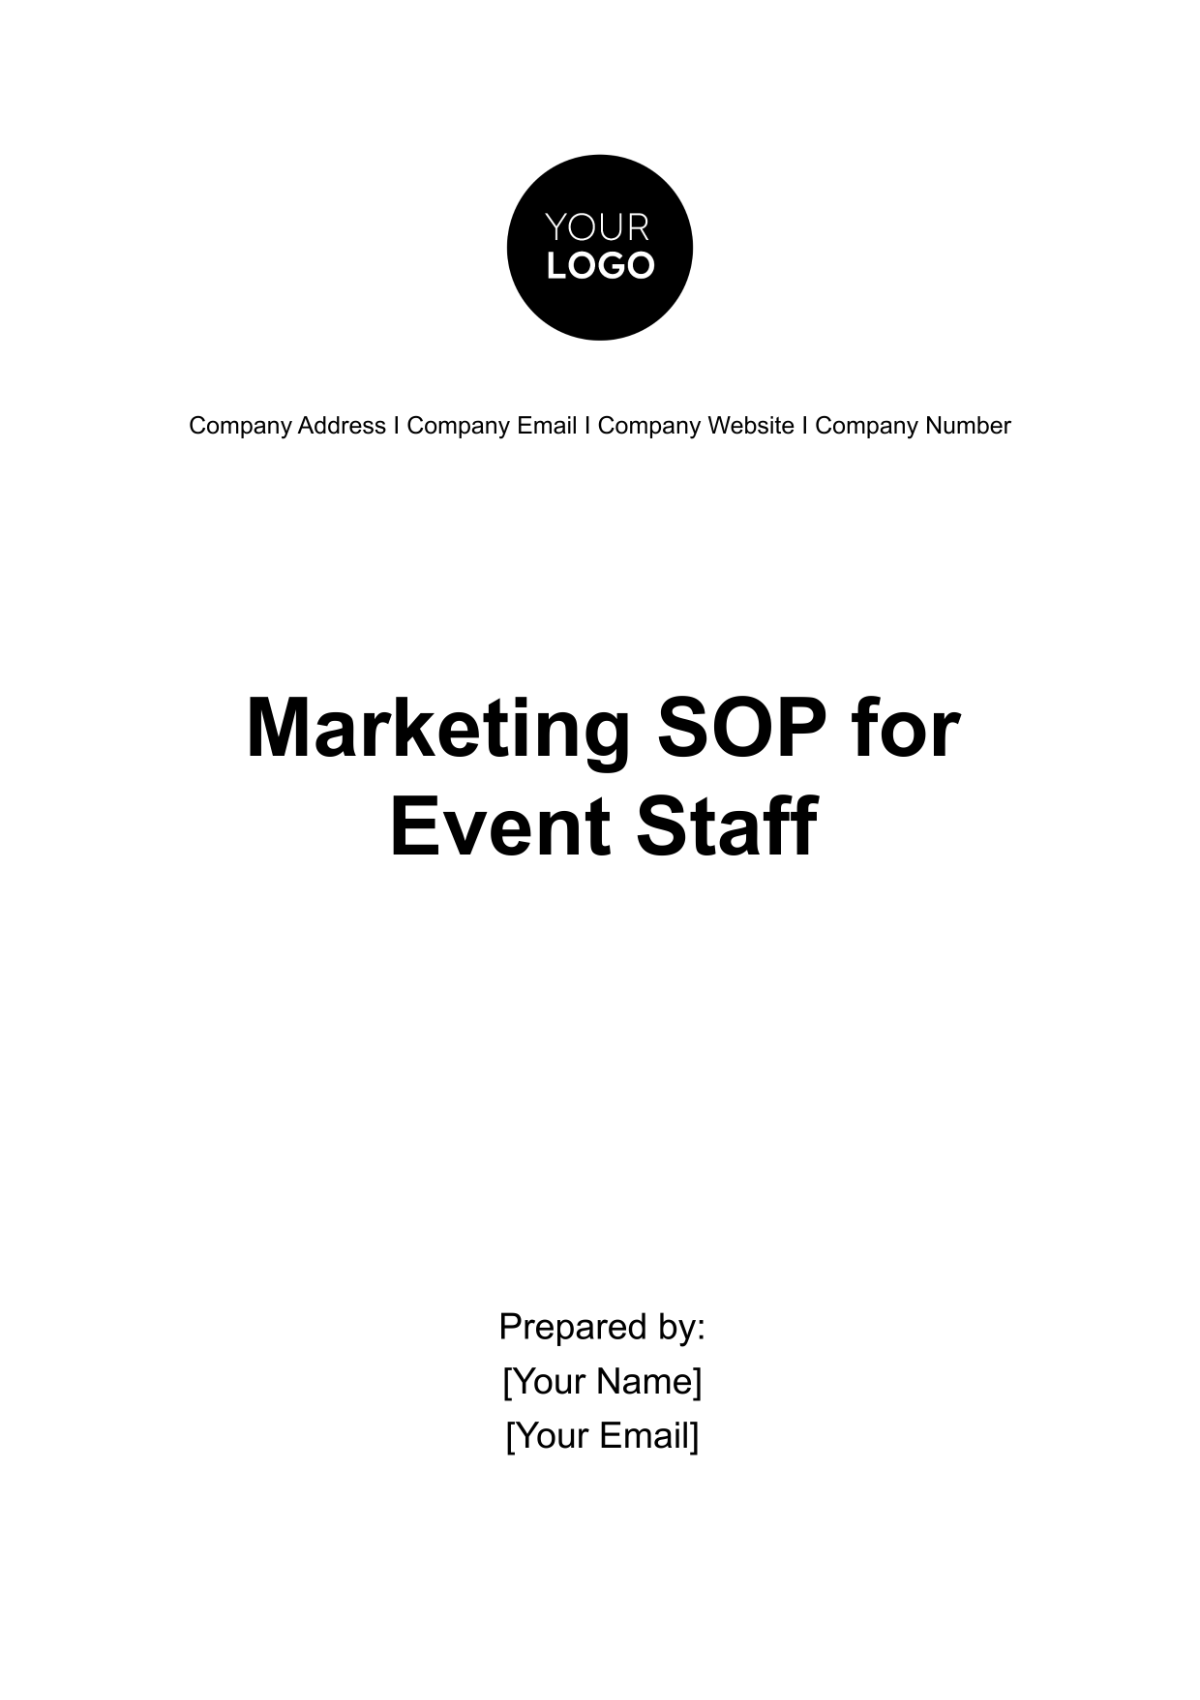 Free Marketing Standard Operating Procedure for Event Staff Template